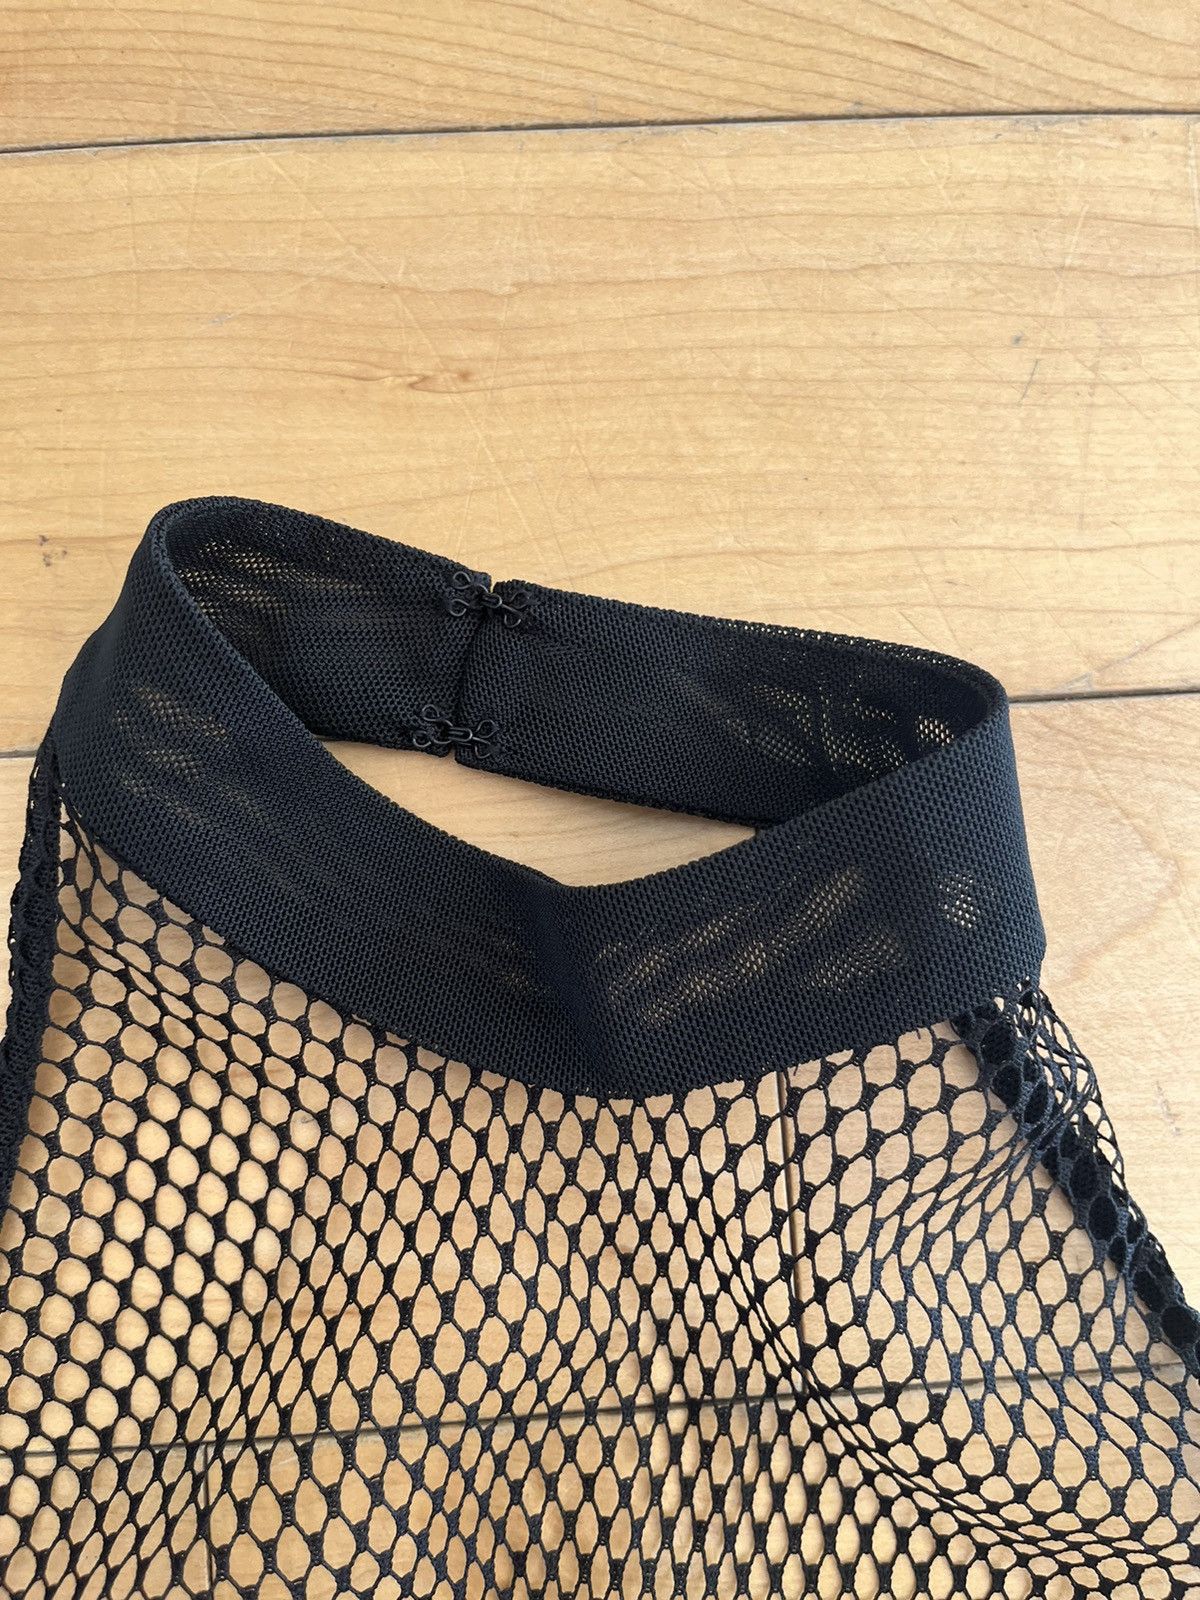 NWT - Dion Lee Lace Underwire Top - 2